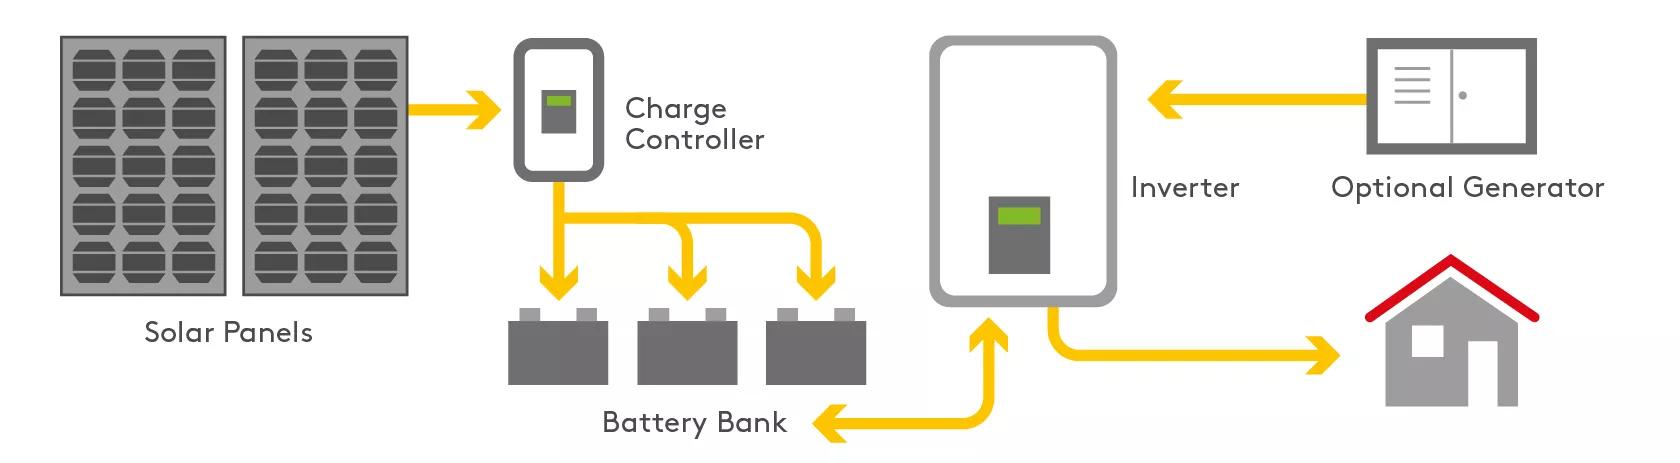 solar panels with battery bank diagram 